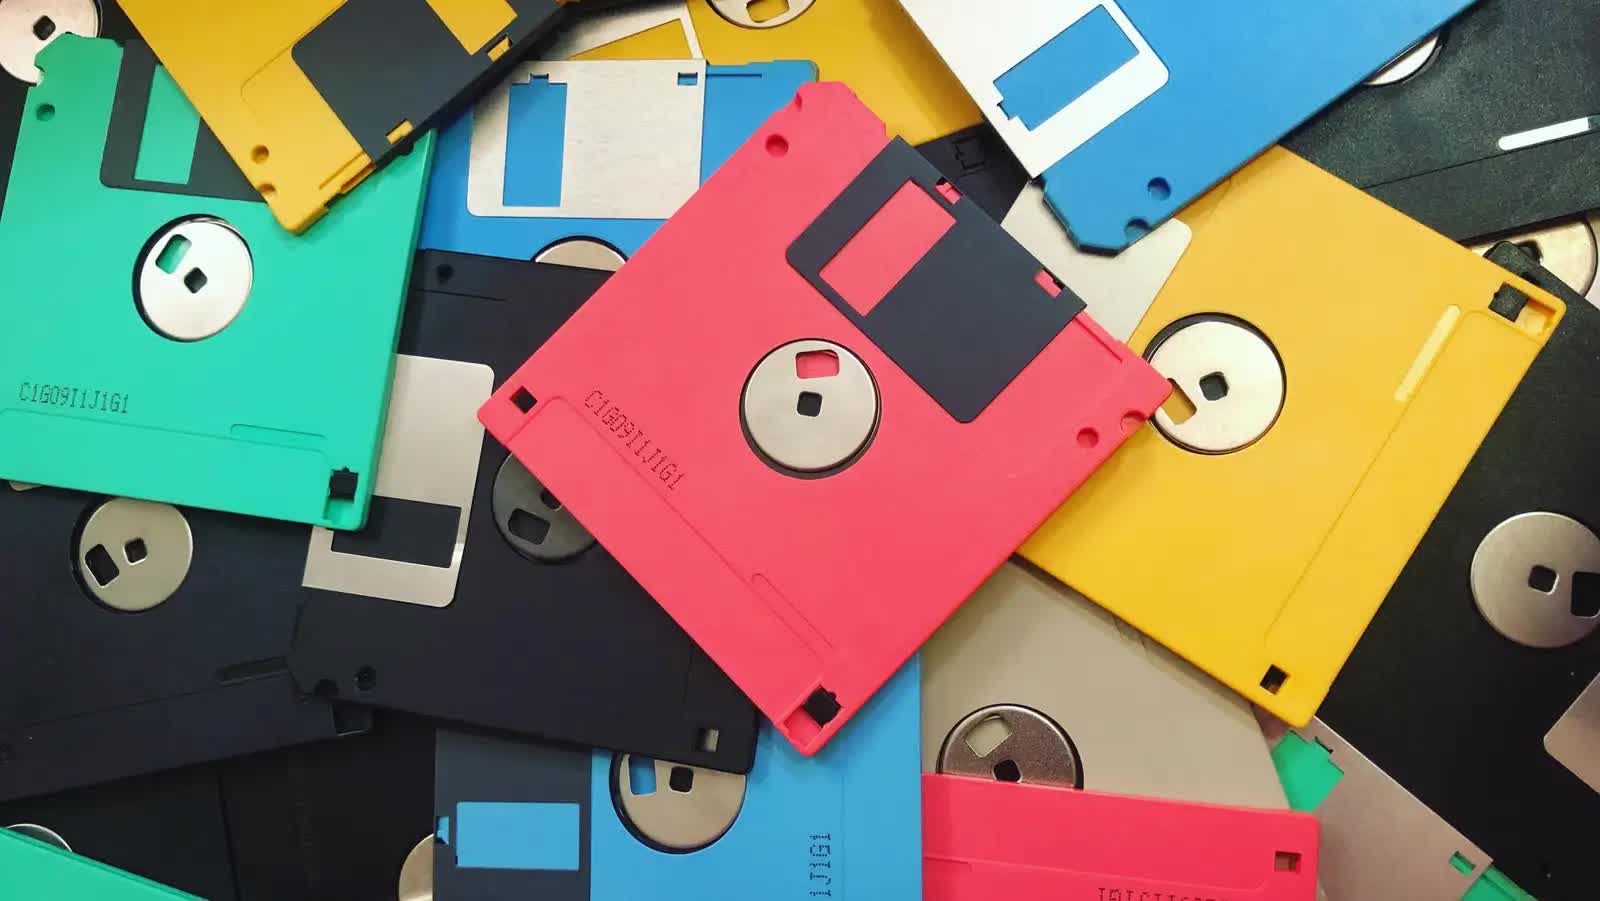 Over a decade after their demise, Japan's government declares war on floppy disks